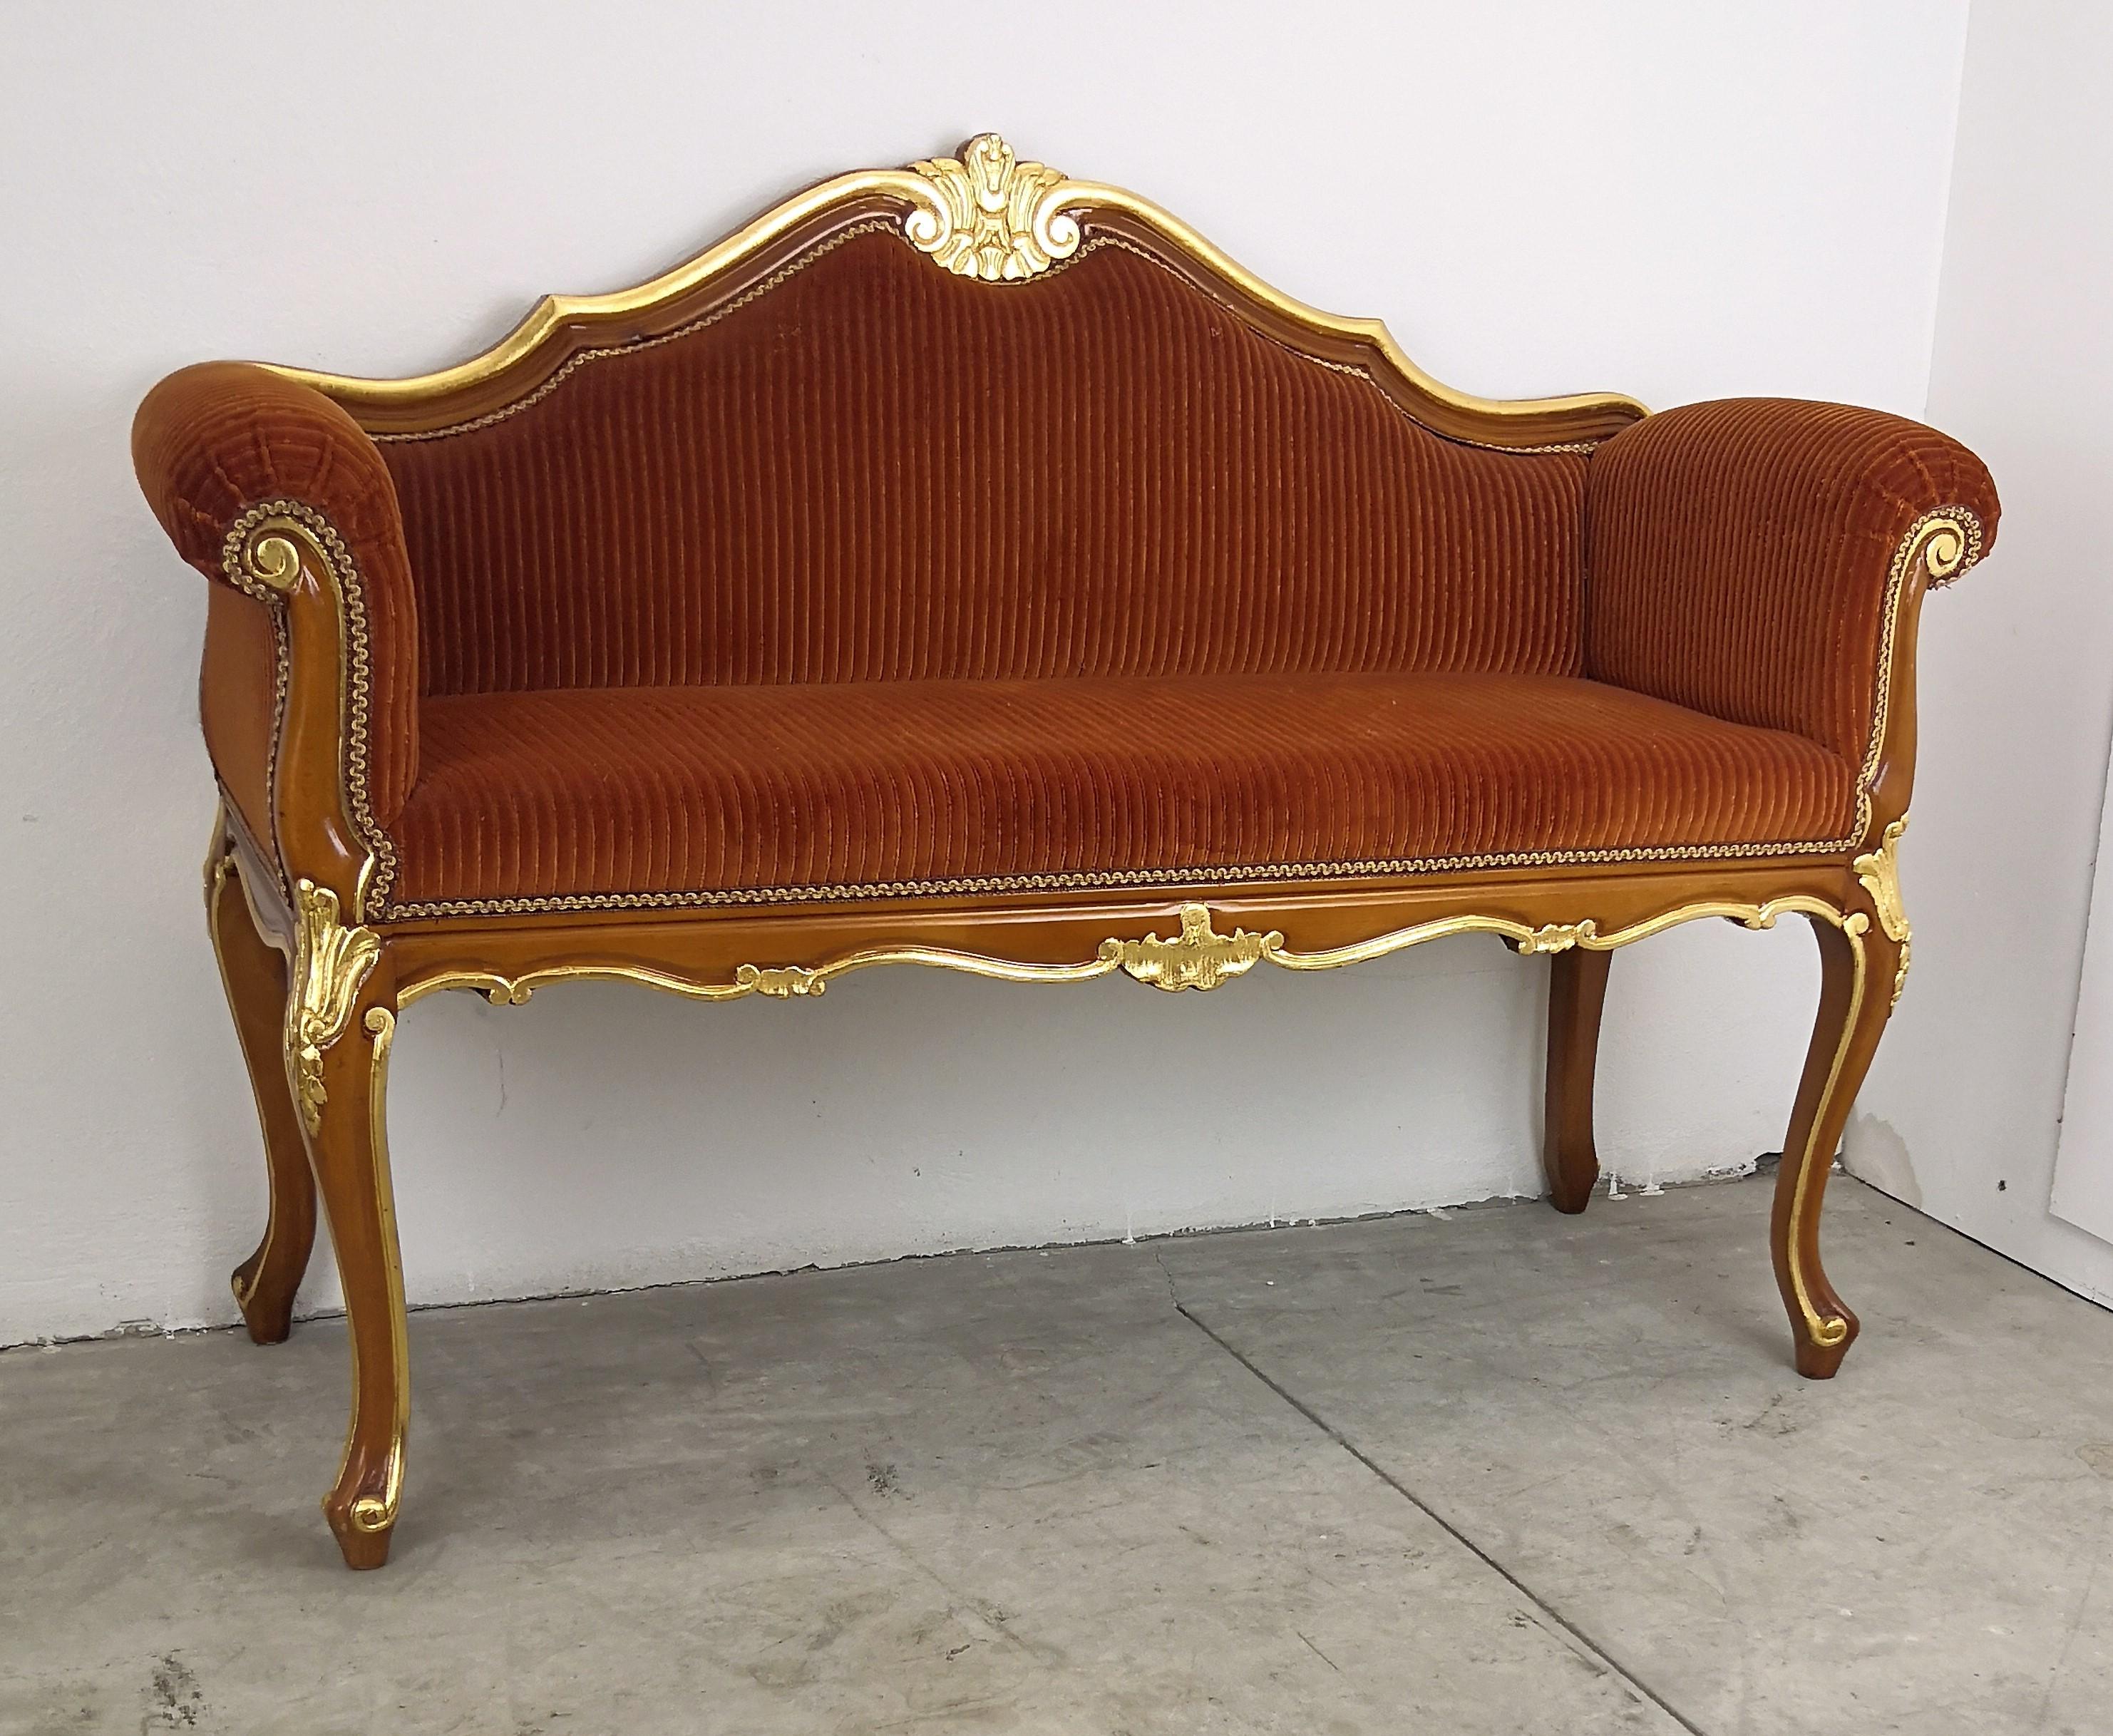 A beautiful and sleek Italian wooden settee, produced in late 1980s-1990s, of Fine quality with excellent profile carvings and gold leaf detail decors, this is a great hallway sofa or entrance seating piece due its slim size. We kept the great and